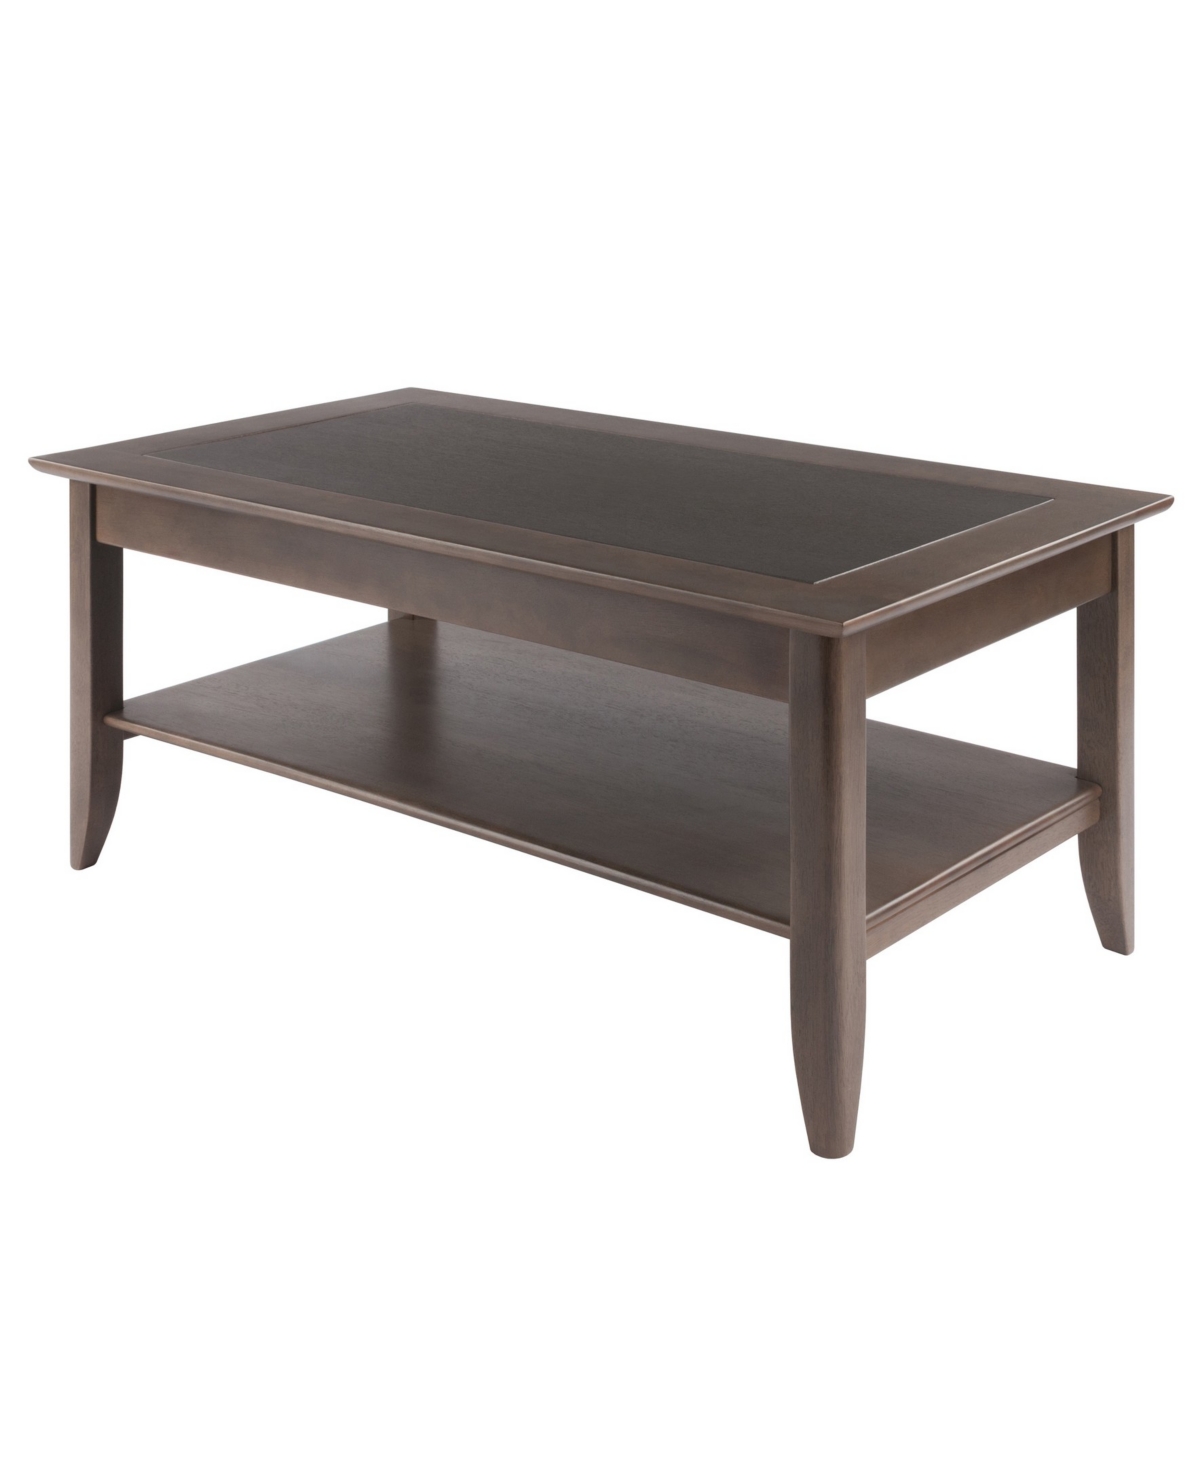 Winsome Santino 18.03" Wood Coffee Table In Oyster Gray